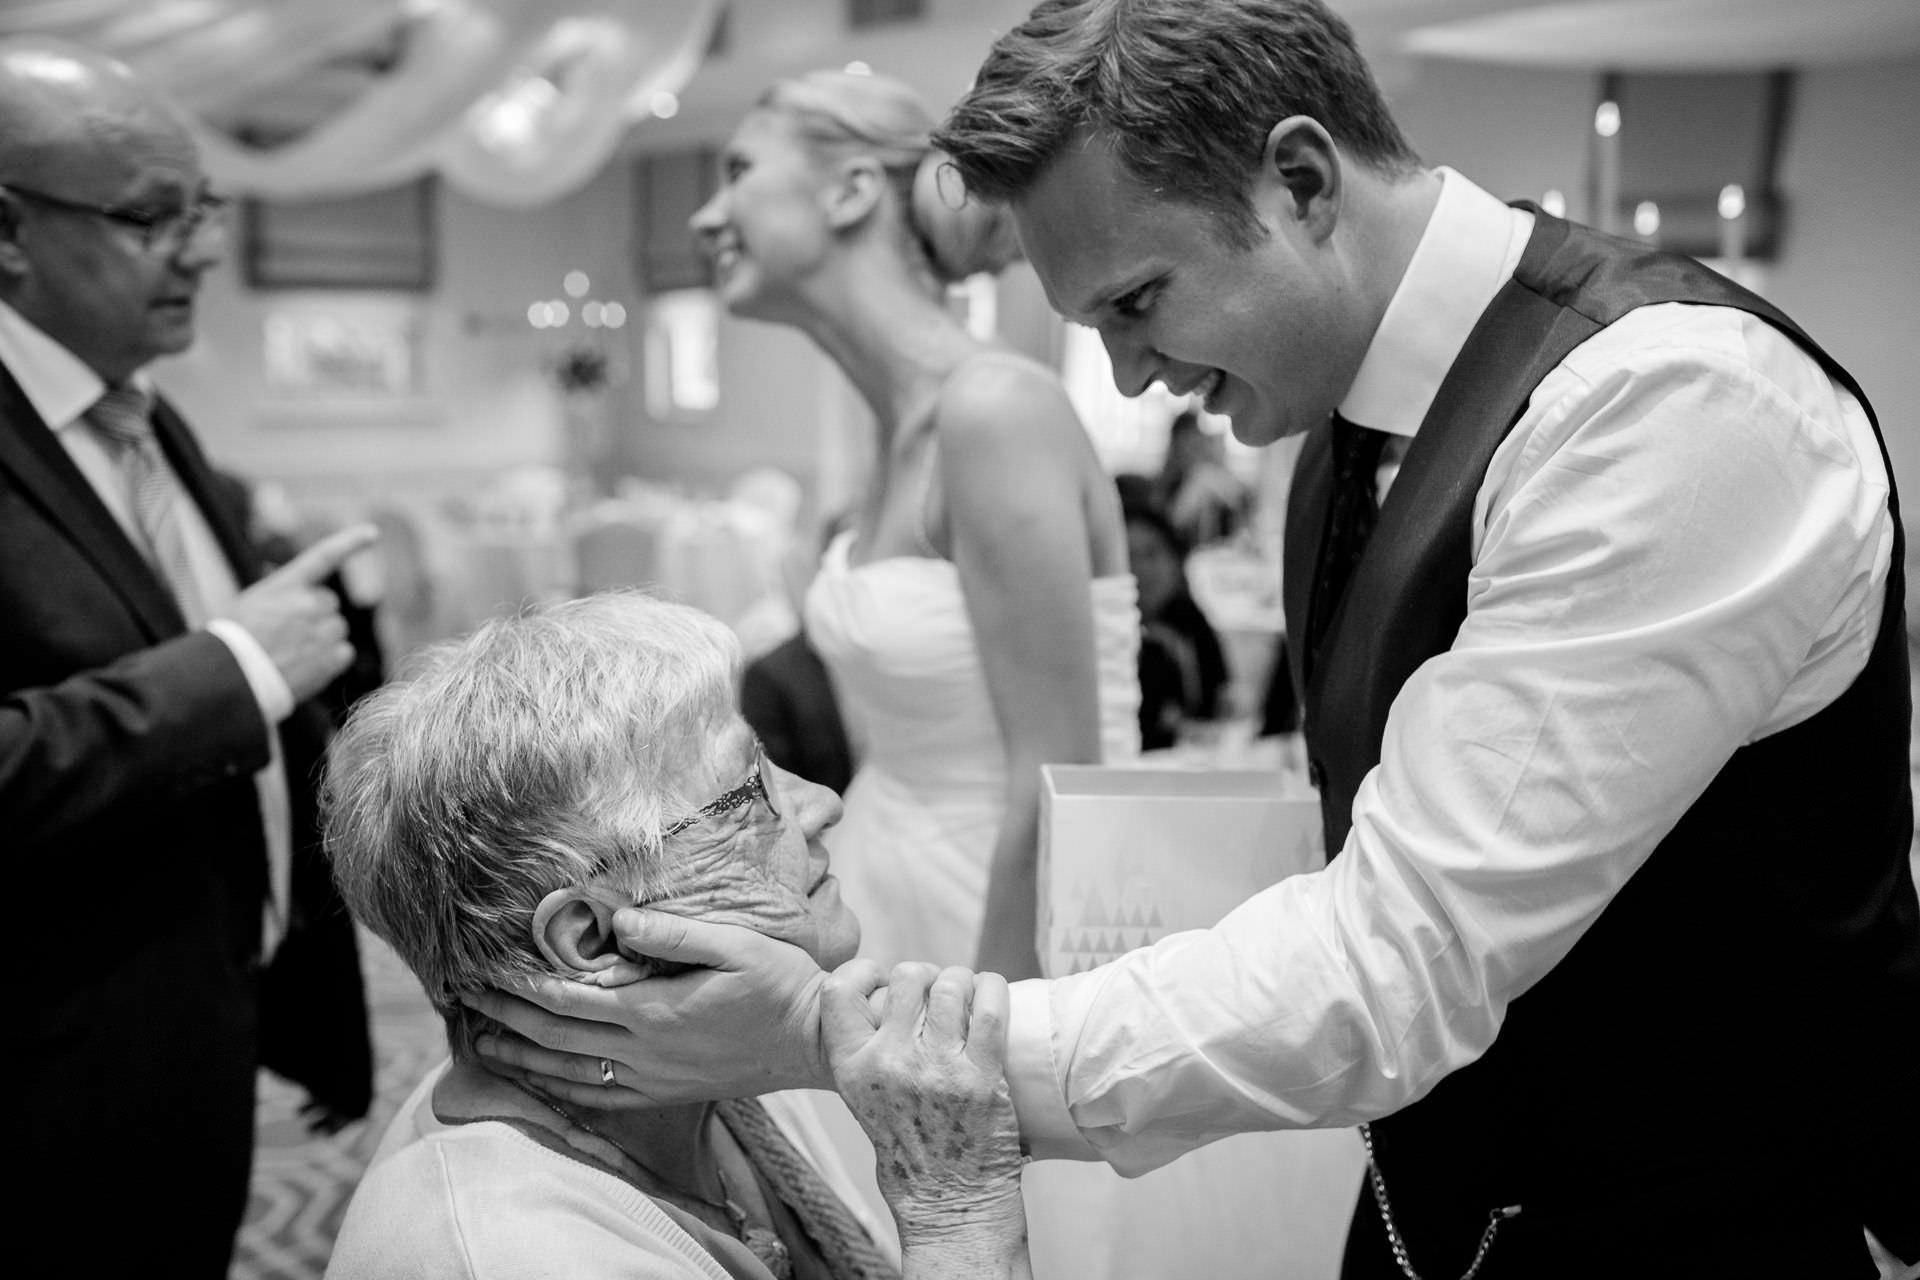 Wotton House wedding emotional moment between groom and his grandmother